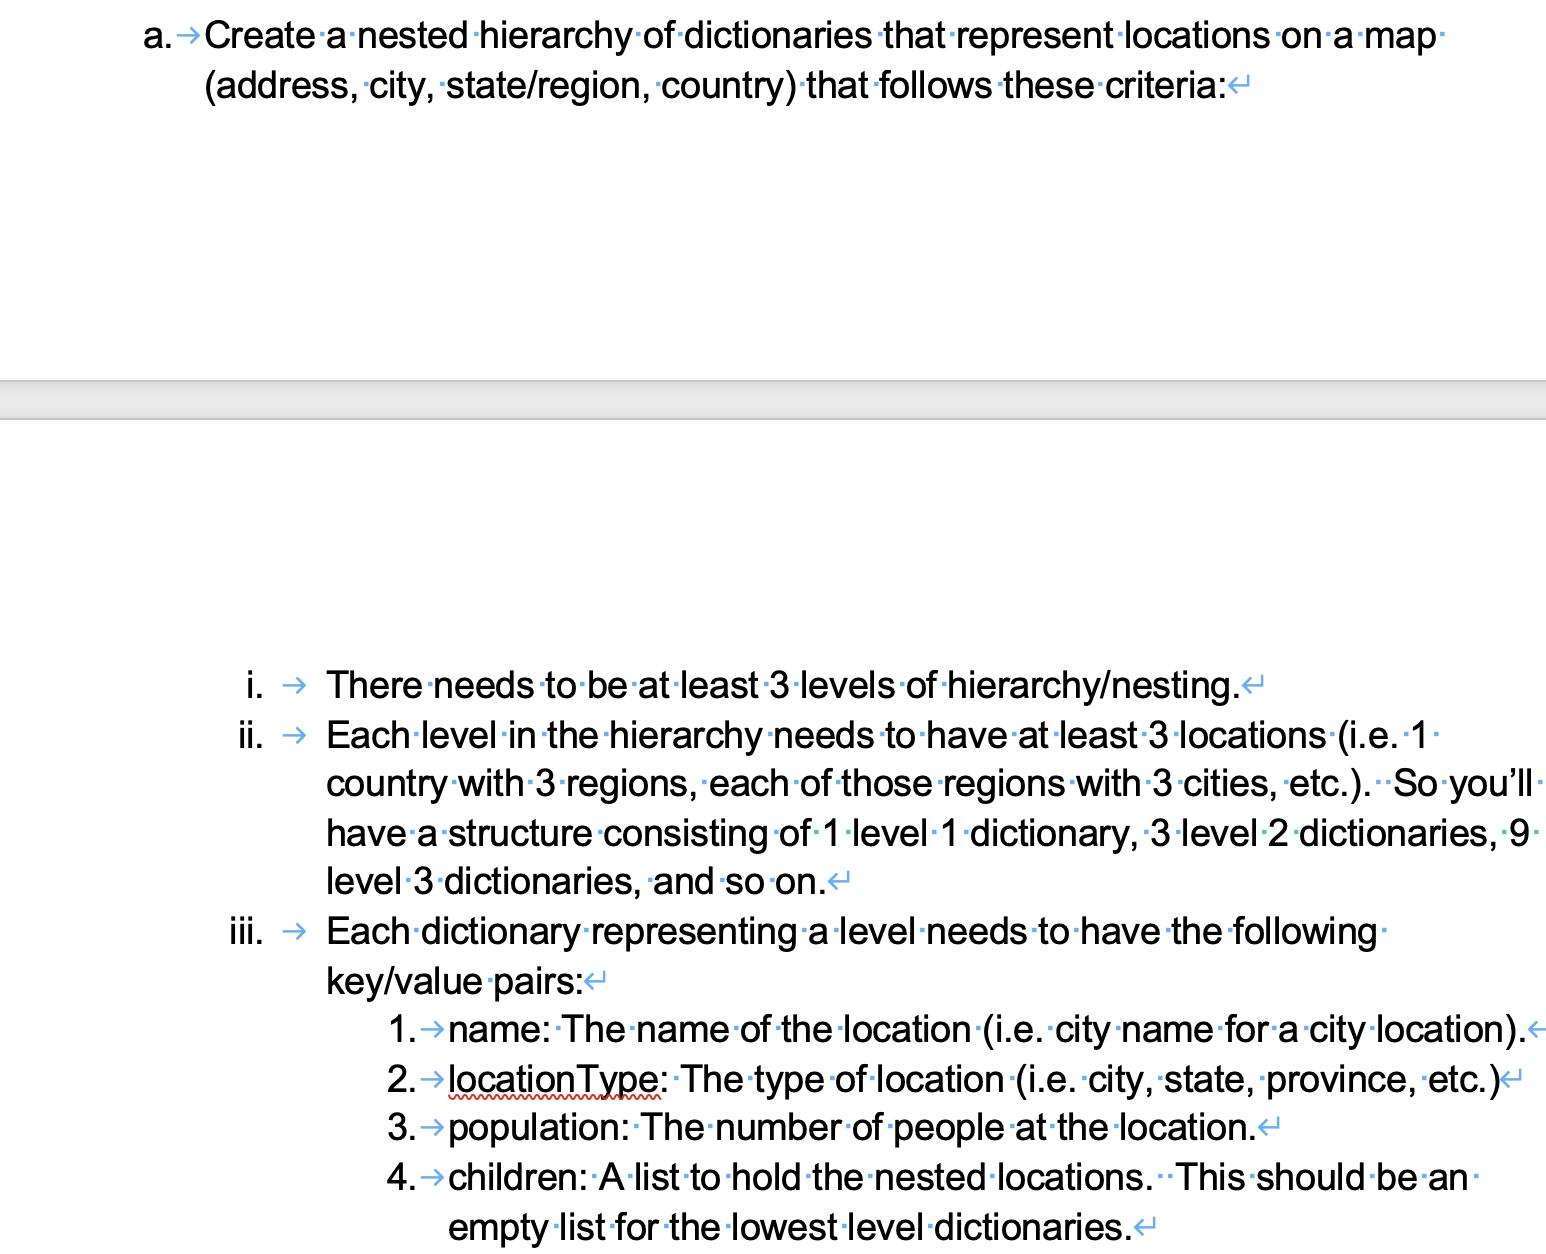 a. Create a nested hierarchy of dictionaries that represent locations on a map (address, city, state/region,